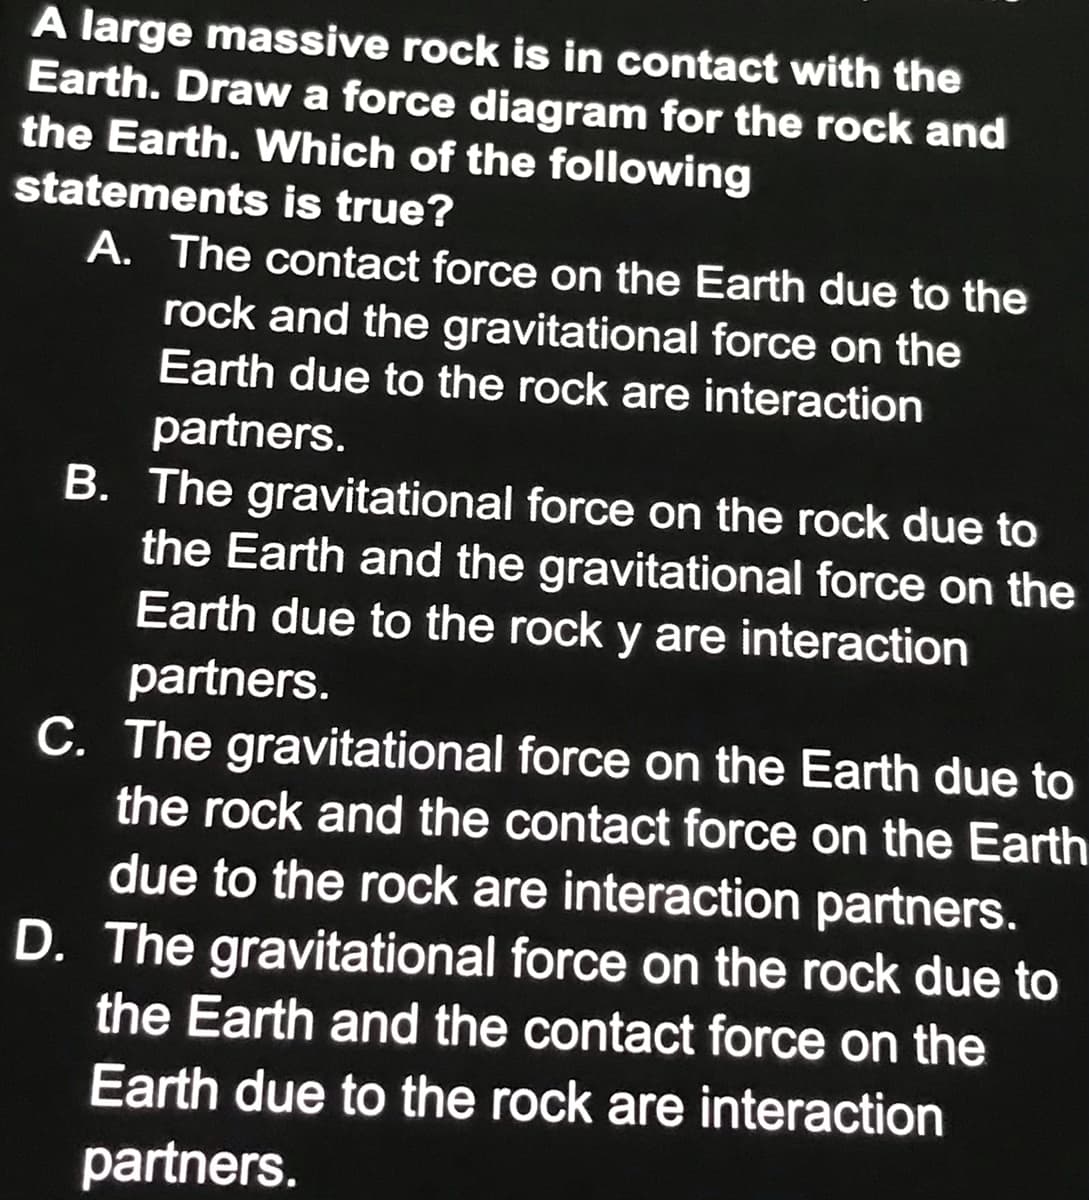 A large massive rock is in contact with the
Earth. Draw a force diagram for the rock and
the Earth. Which of the following
statements is true?
A. The contact force on the Earth due to the
rock and the gravitational force on the
Earth due to the rock are interaction
partners.
B. The gravitational force on the rock due to
the Earth and the gravitational force on the
Earth due to the rock y are interaction
partners.
C. The gravitational force on the Earth due to
the rock and the contact force on the Earth
due to the rock are interaction partners.
D. The gravitational force on the rock due to
the Earth and the contact force on the
Earth due to the rock are interaction
partners.